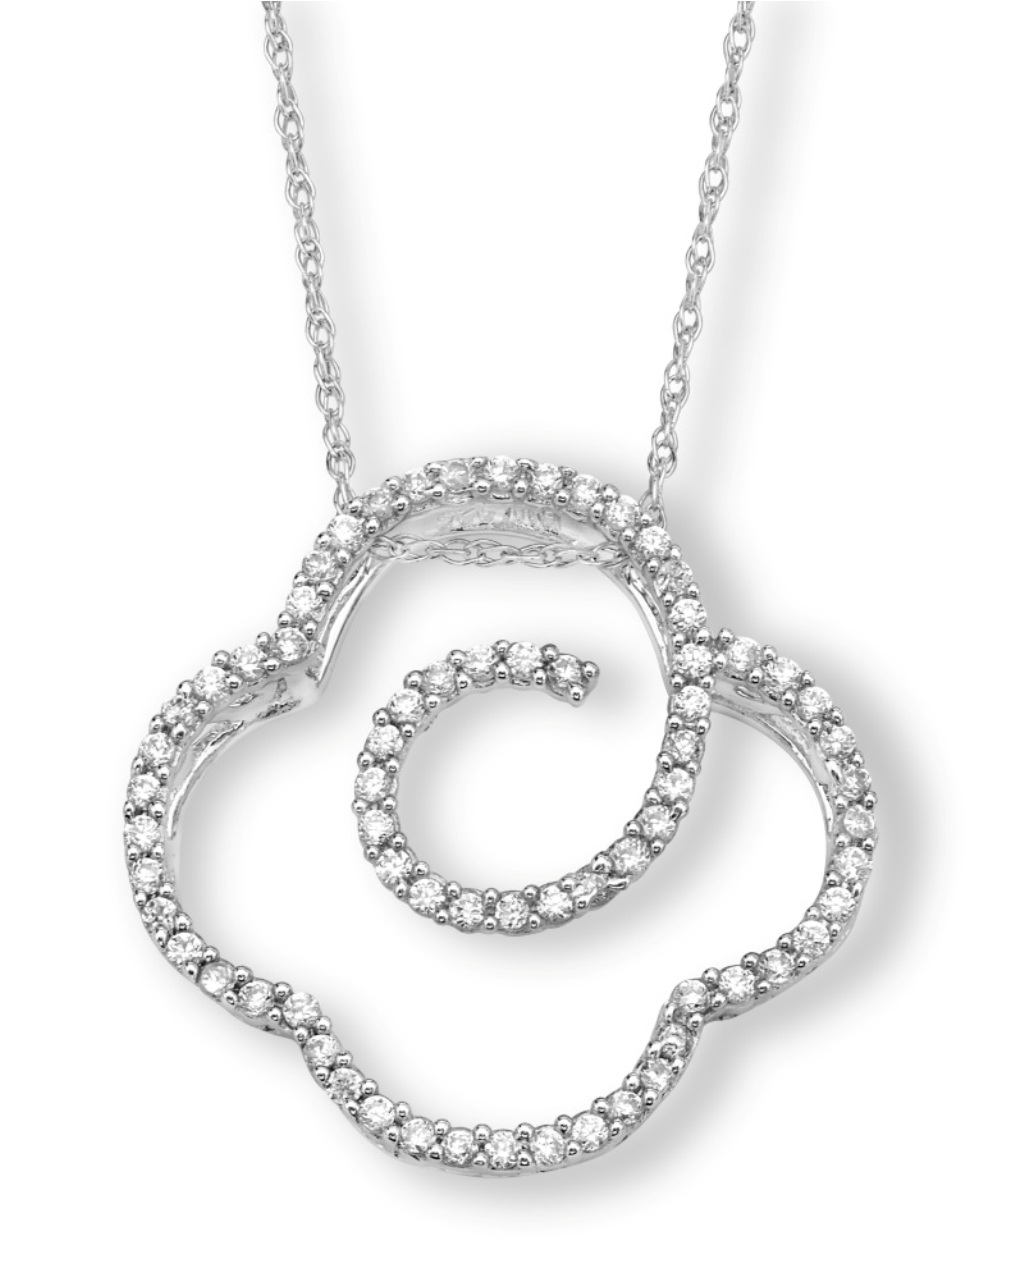  Petite Round CZ Quaterfoil Pendant Necklace, Rhodium Plated Sterling Silver, 18